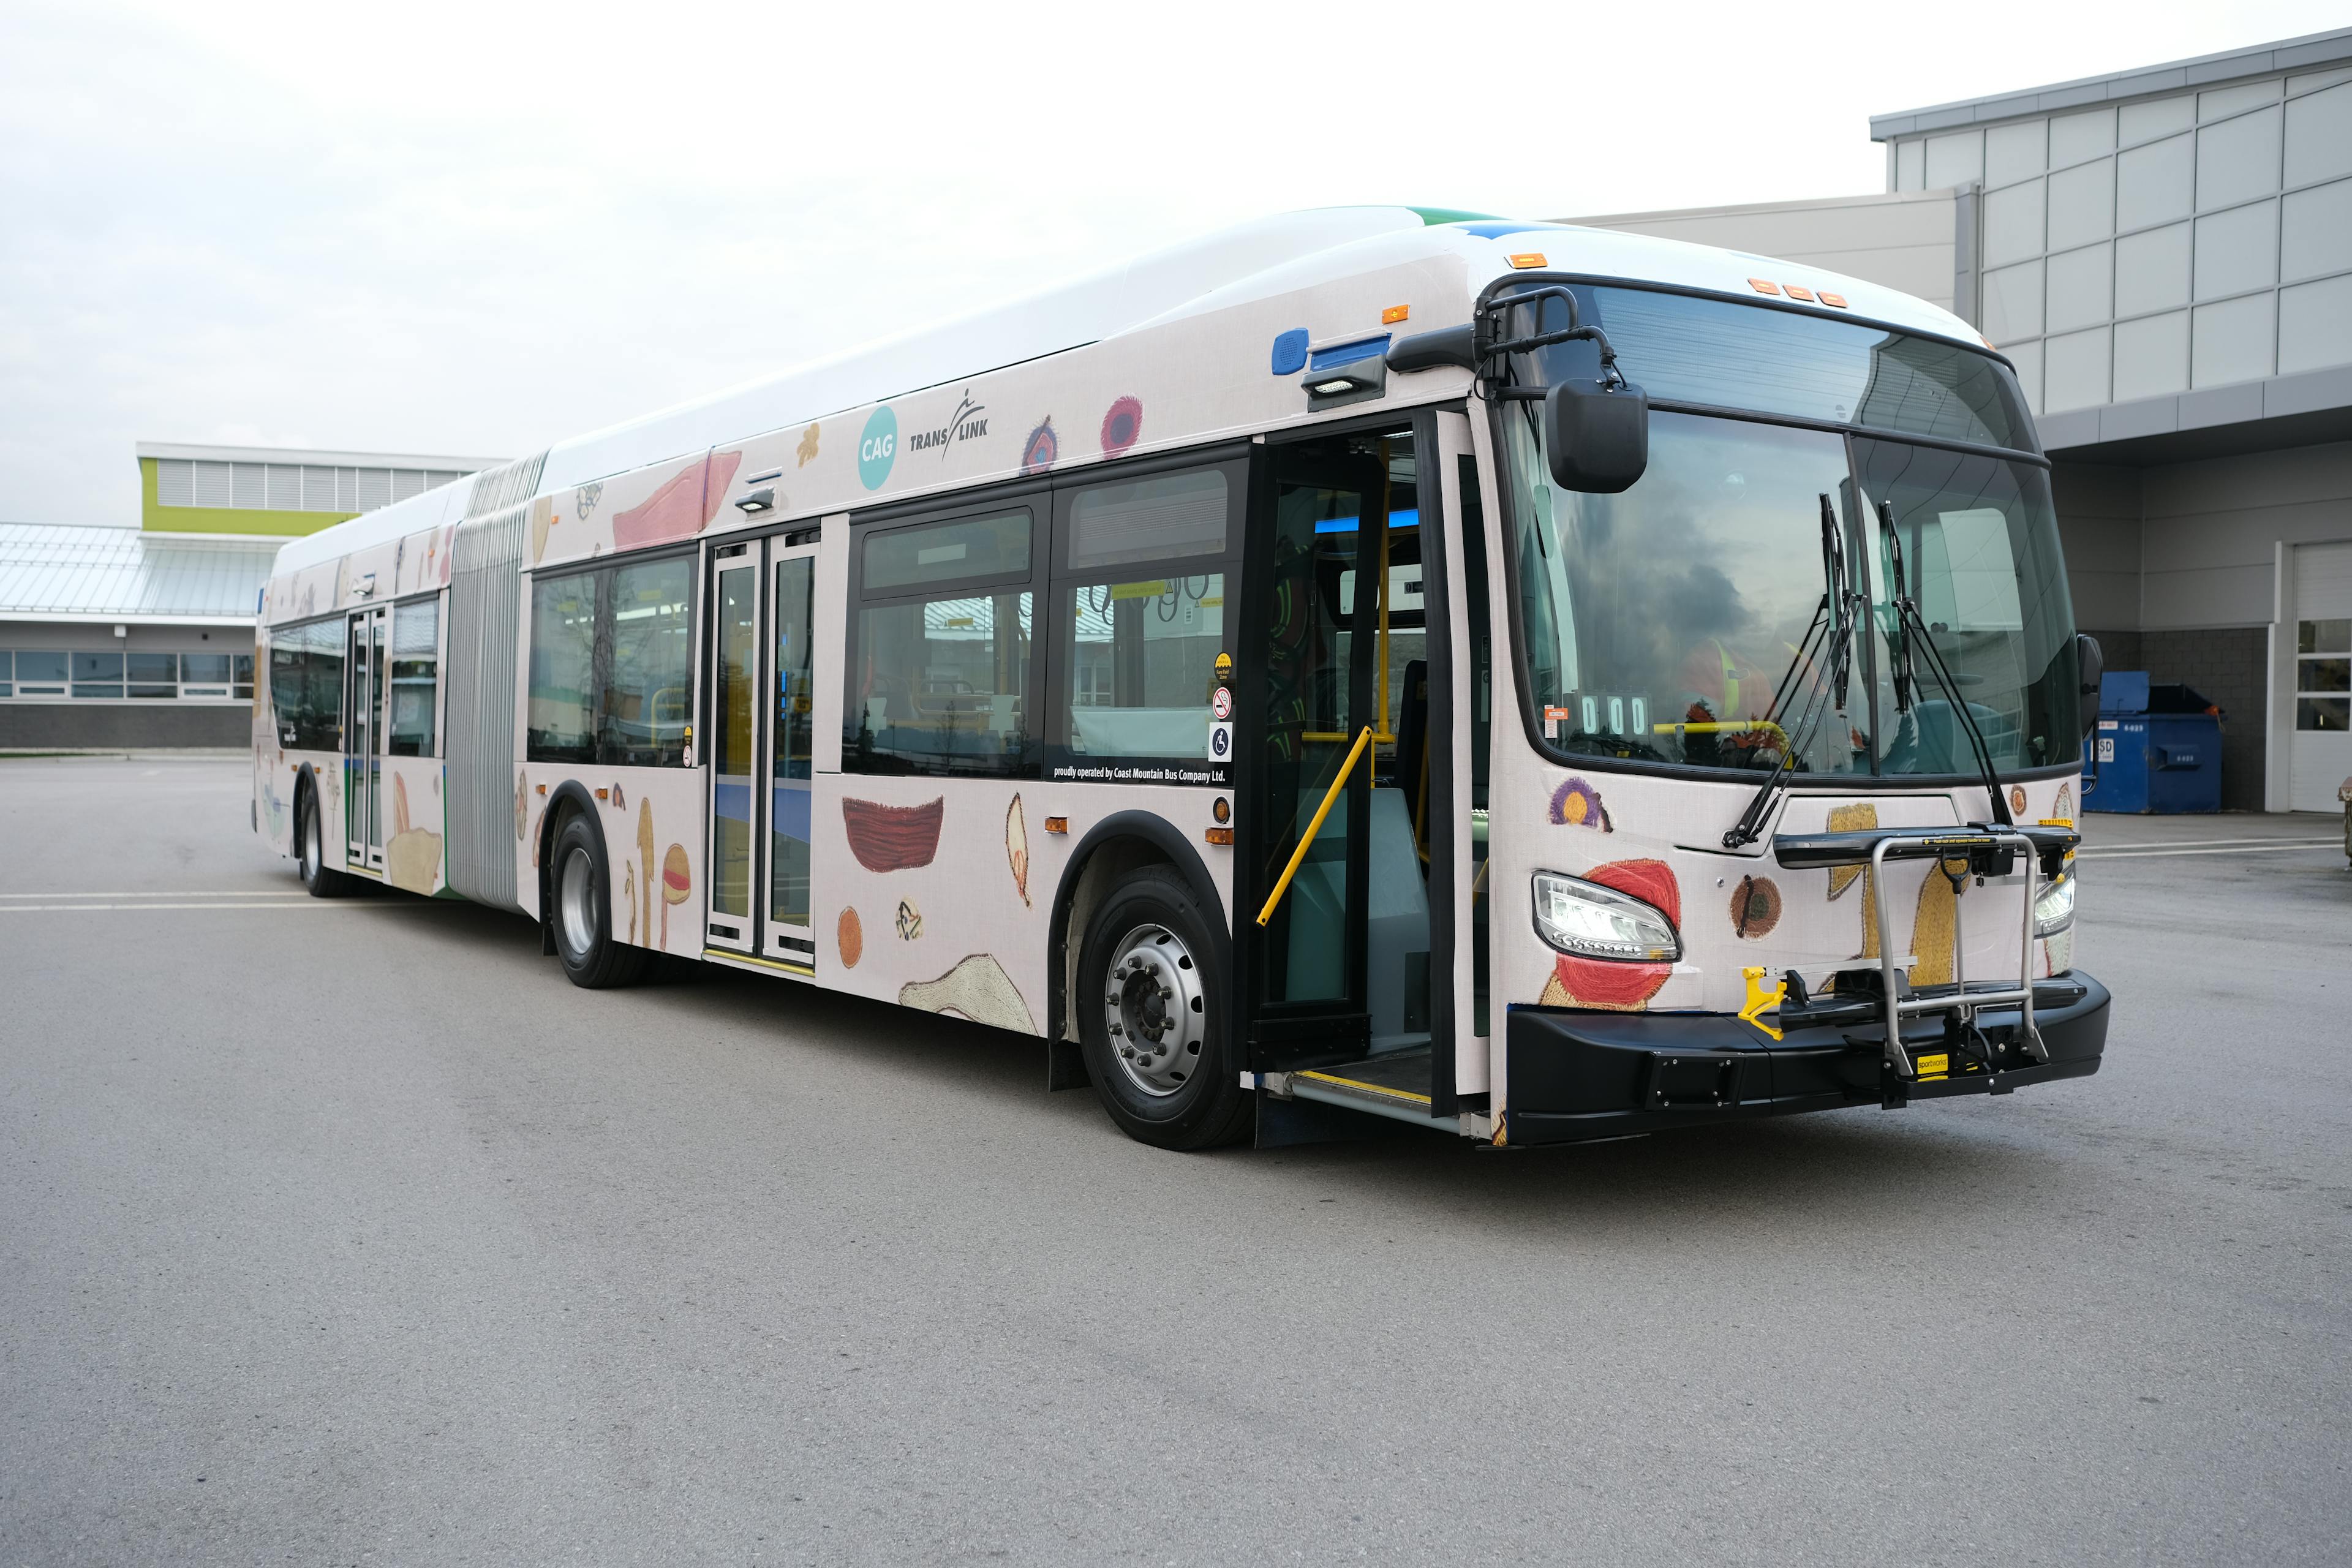 An image of the exterior of a transit bus that is wrapped in a patterned vinyl. The vinyl pattern is made up of a plain pink background with abstract illustrations of various forms and shapes. 